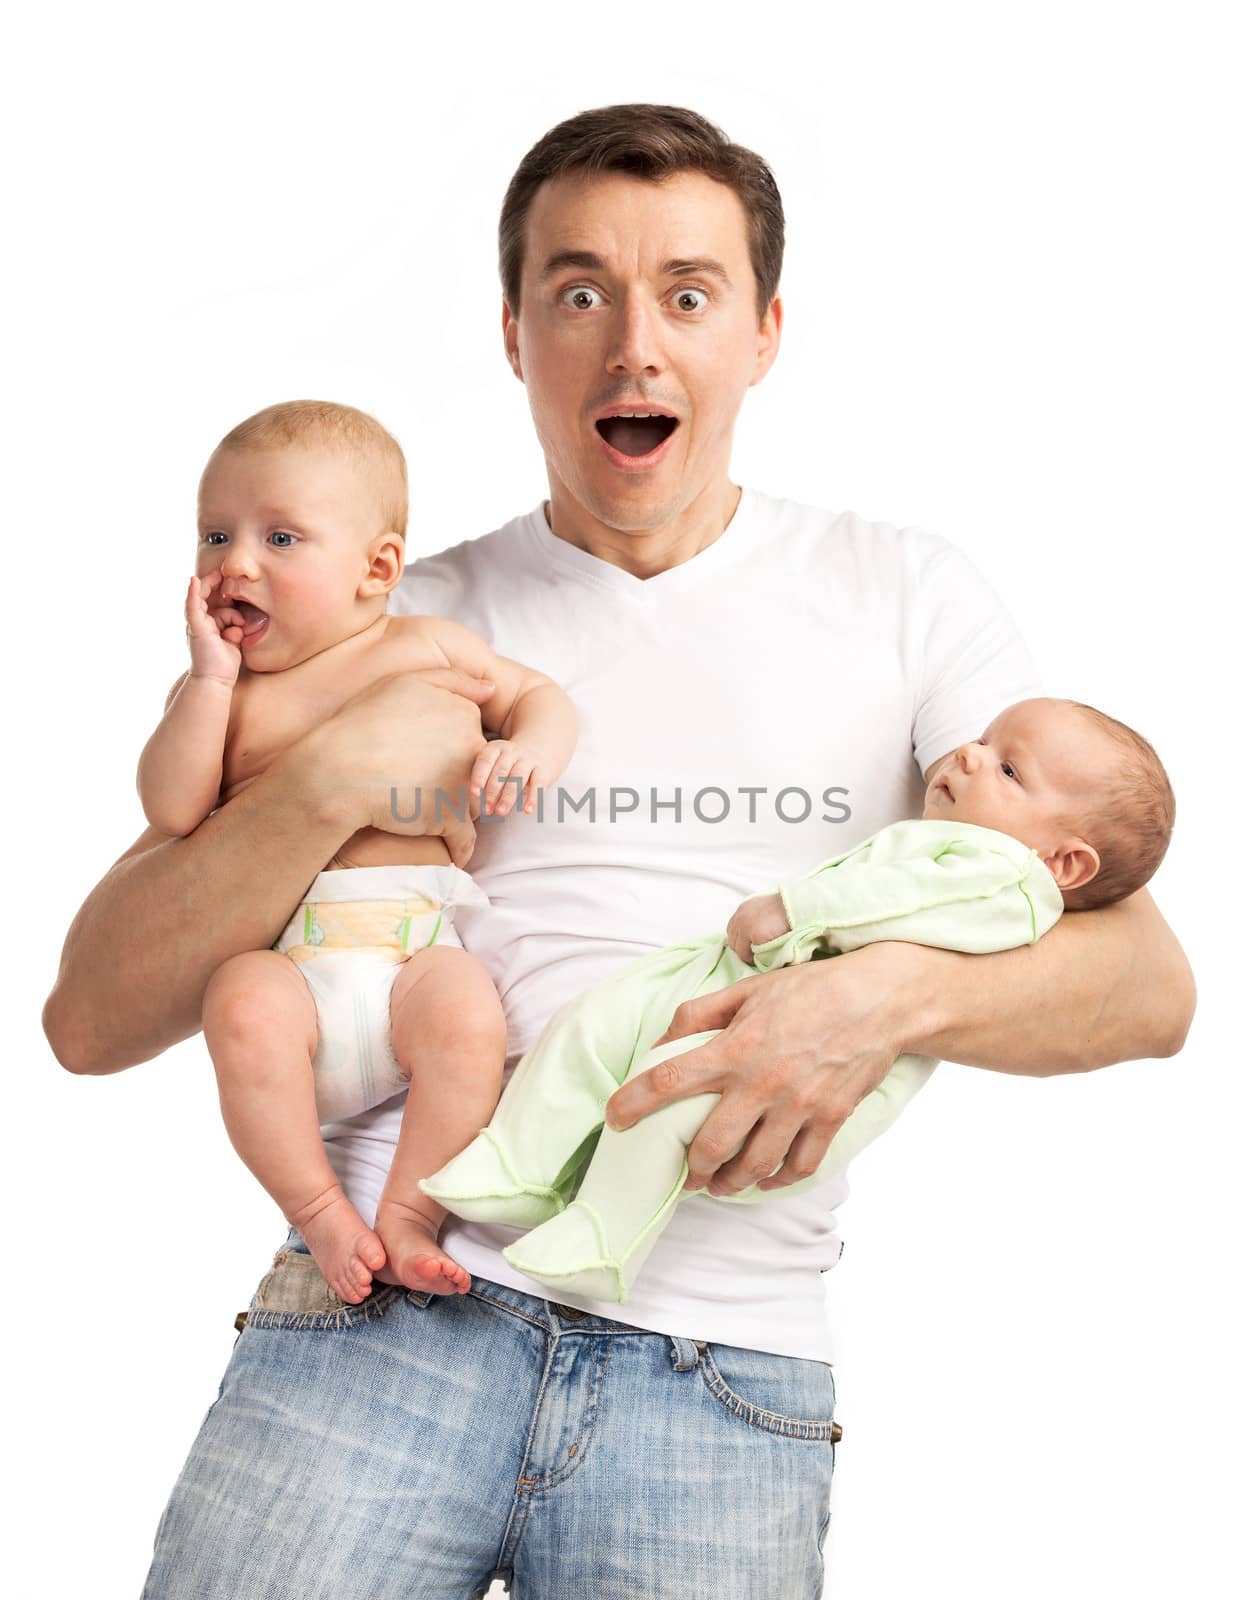 Smiling young man with two baby boys over white by photobac